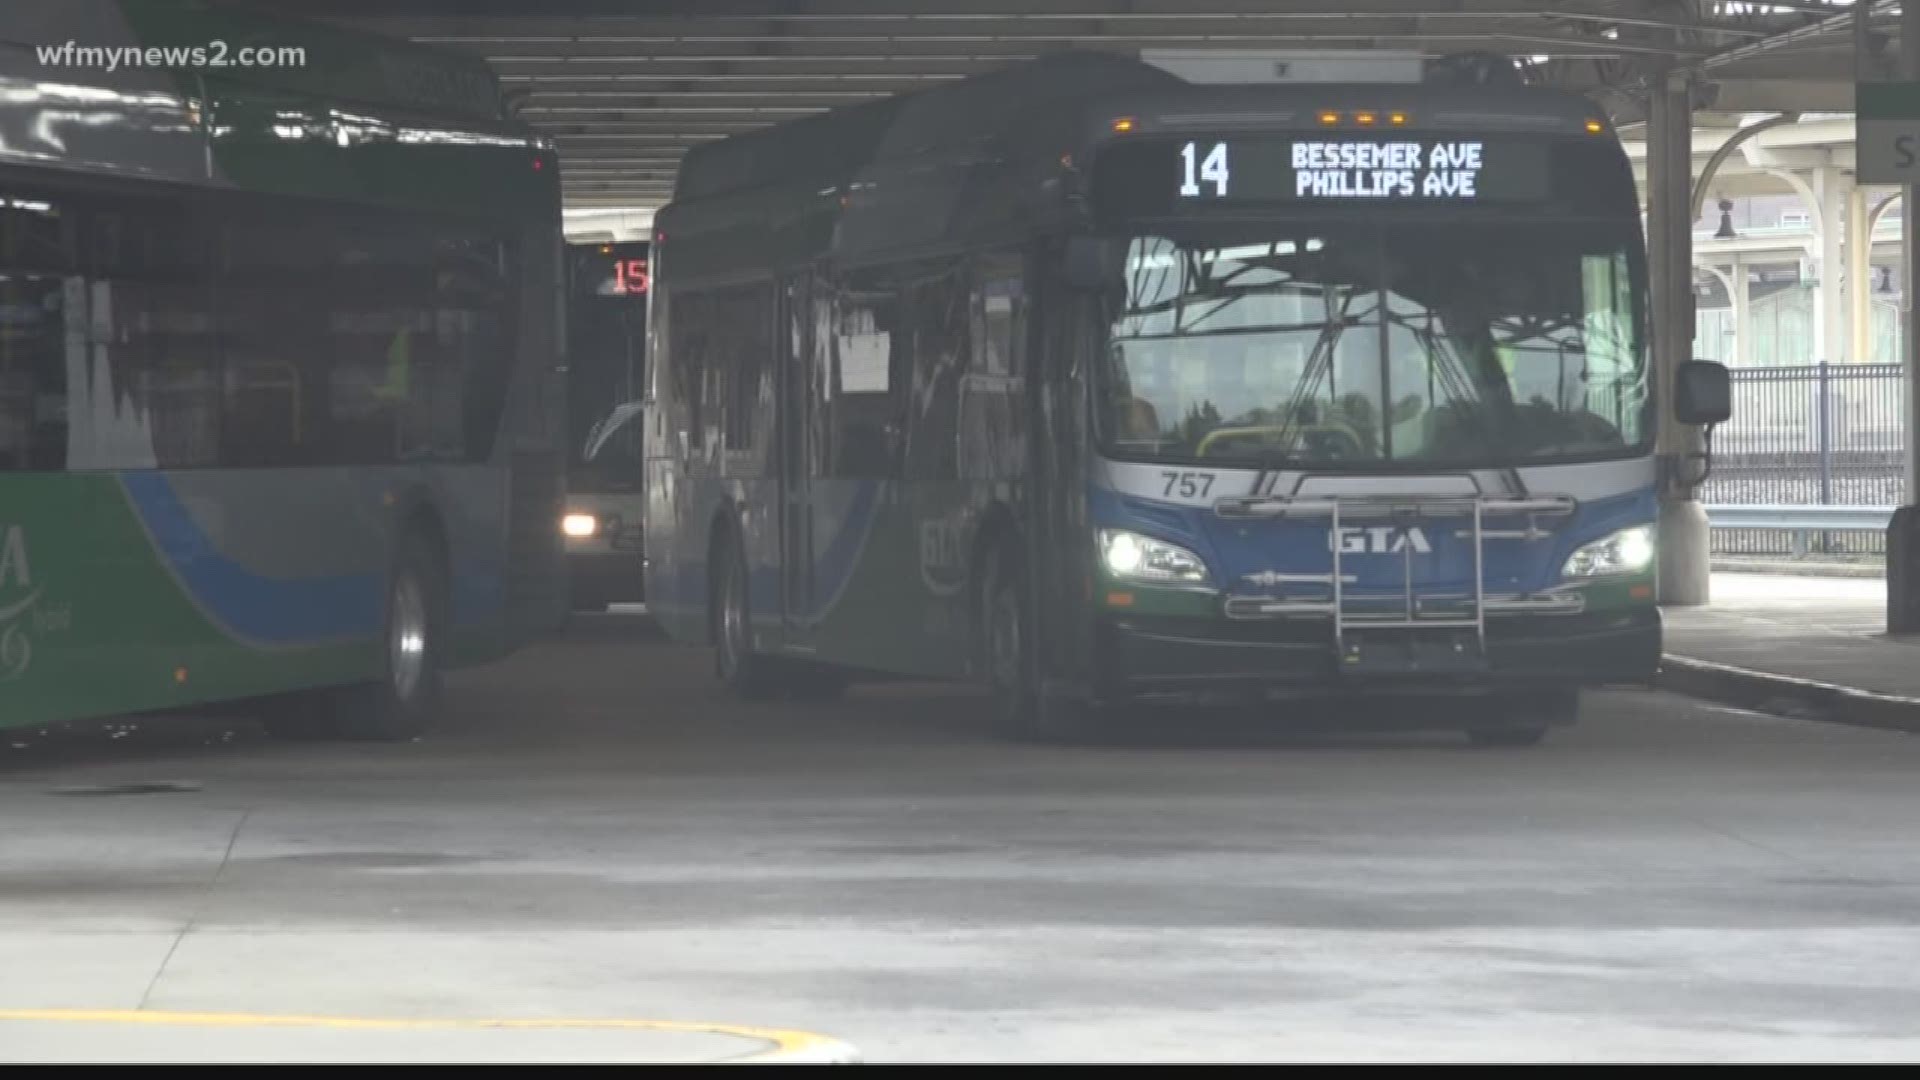 An ambulance was called to the bus depot on Monday because someone was suffering from what appeared to be coronavirus symptoms in the City of Greensboro.